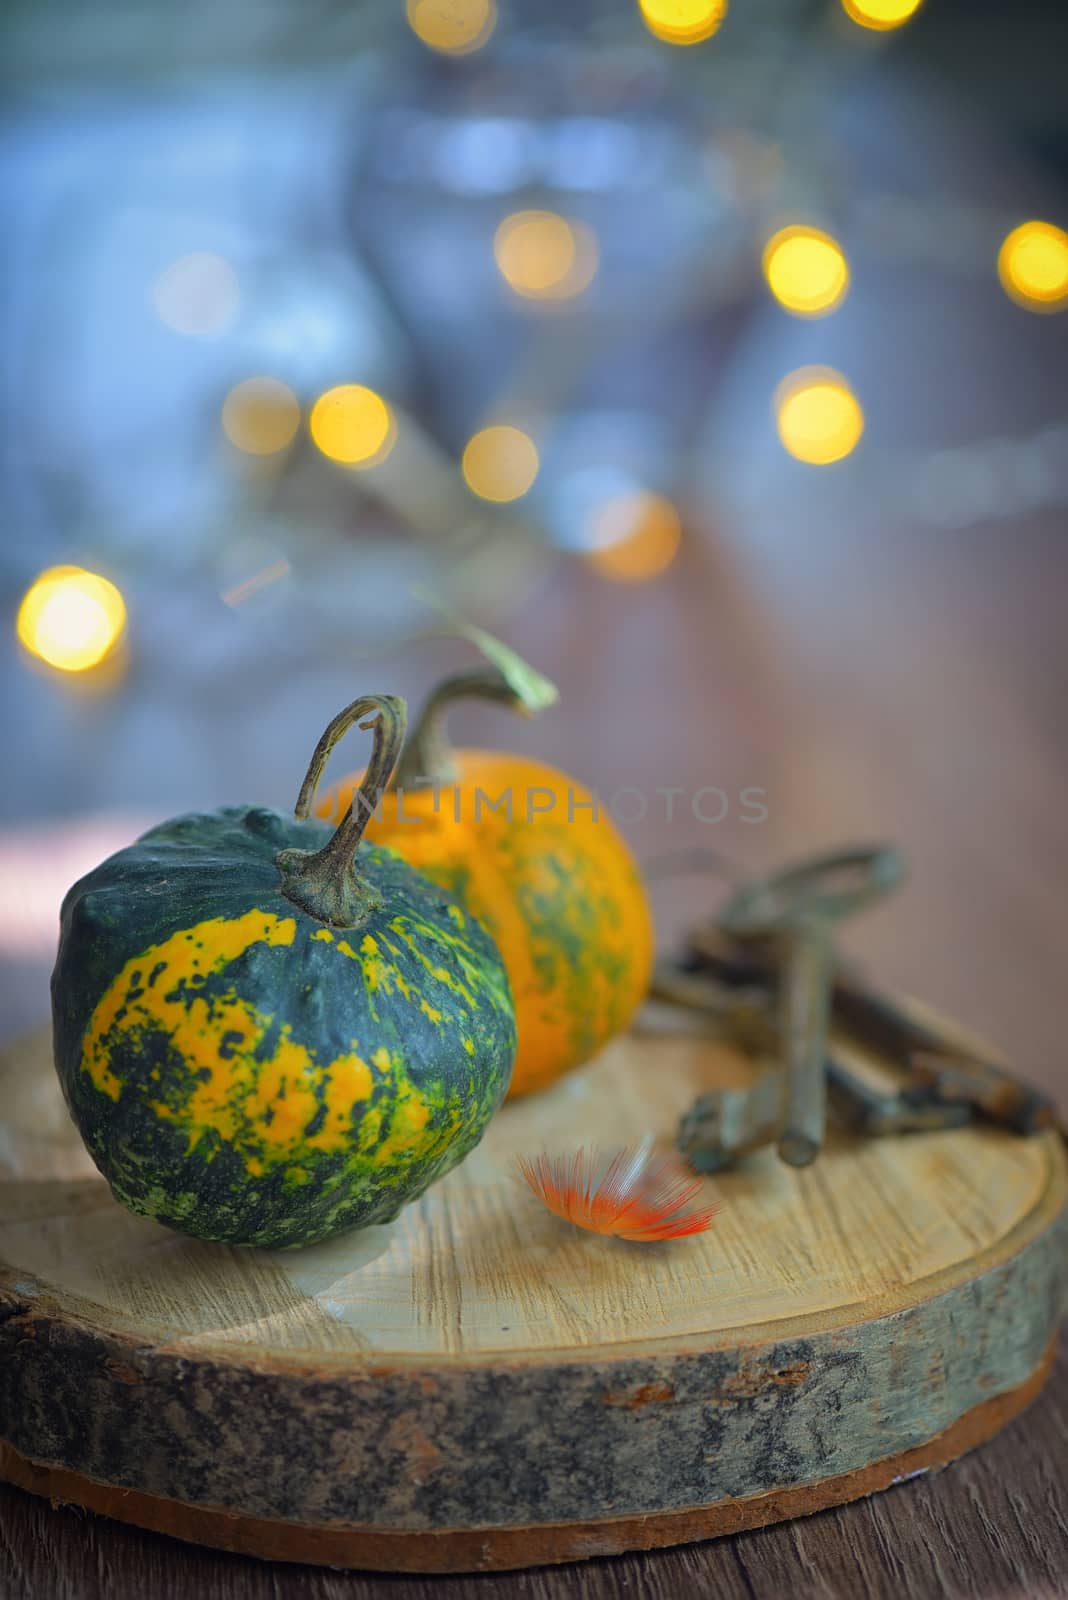 Autumn decoration with small pumpkins and lights